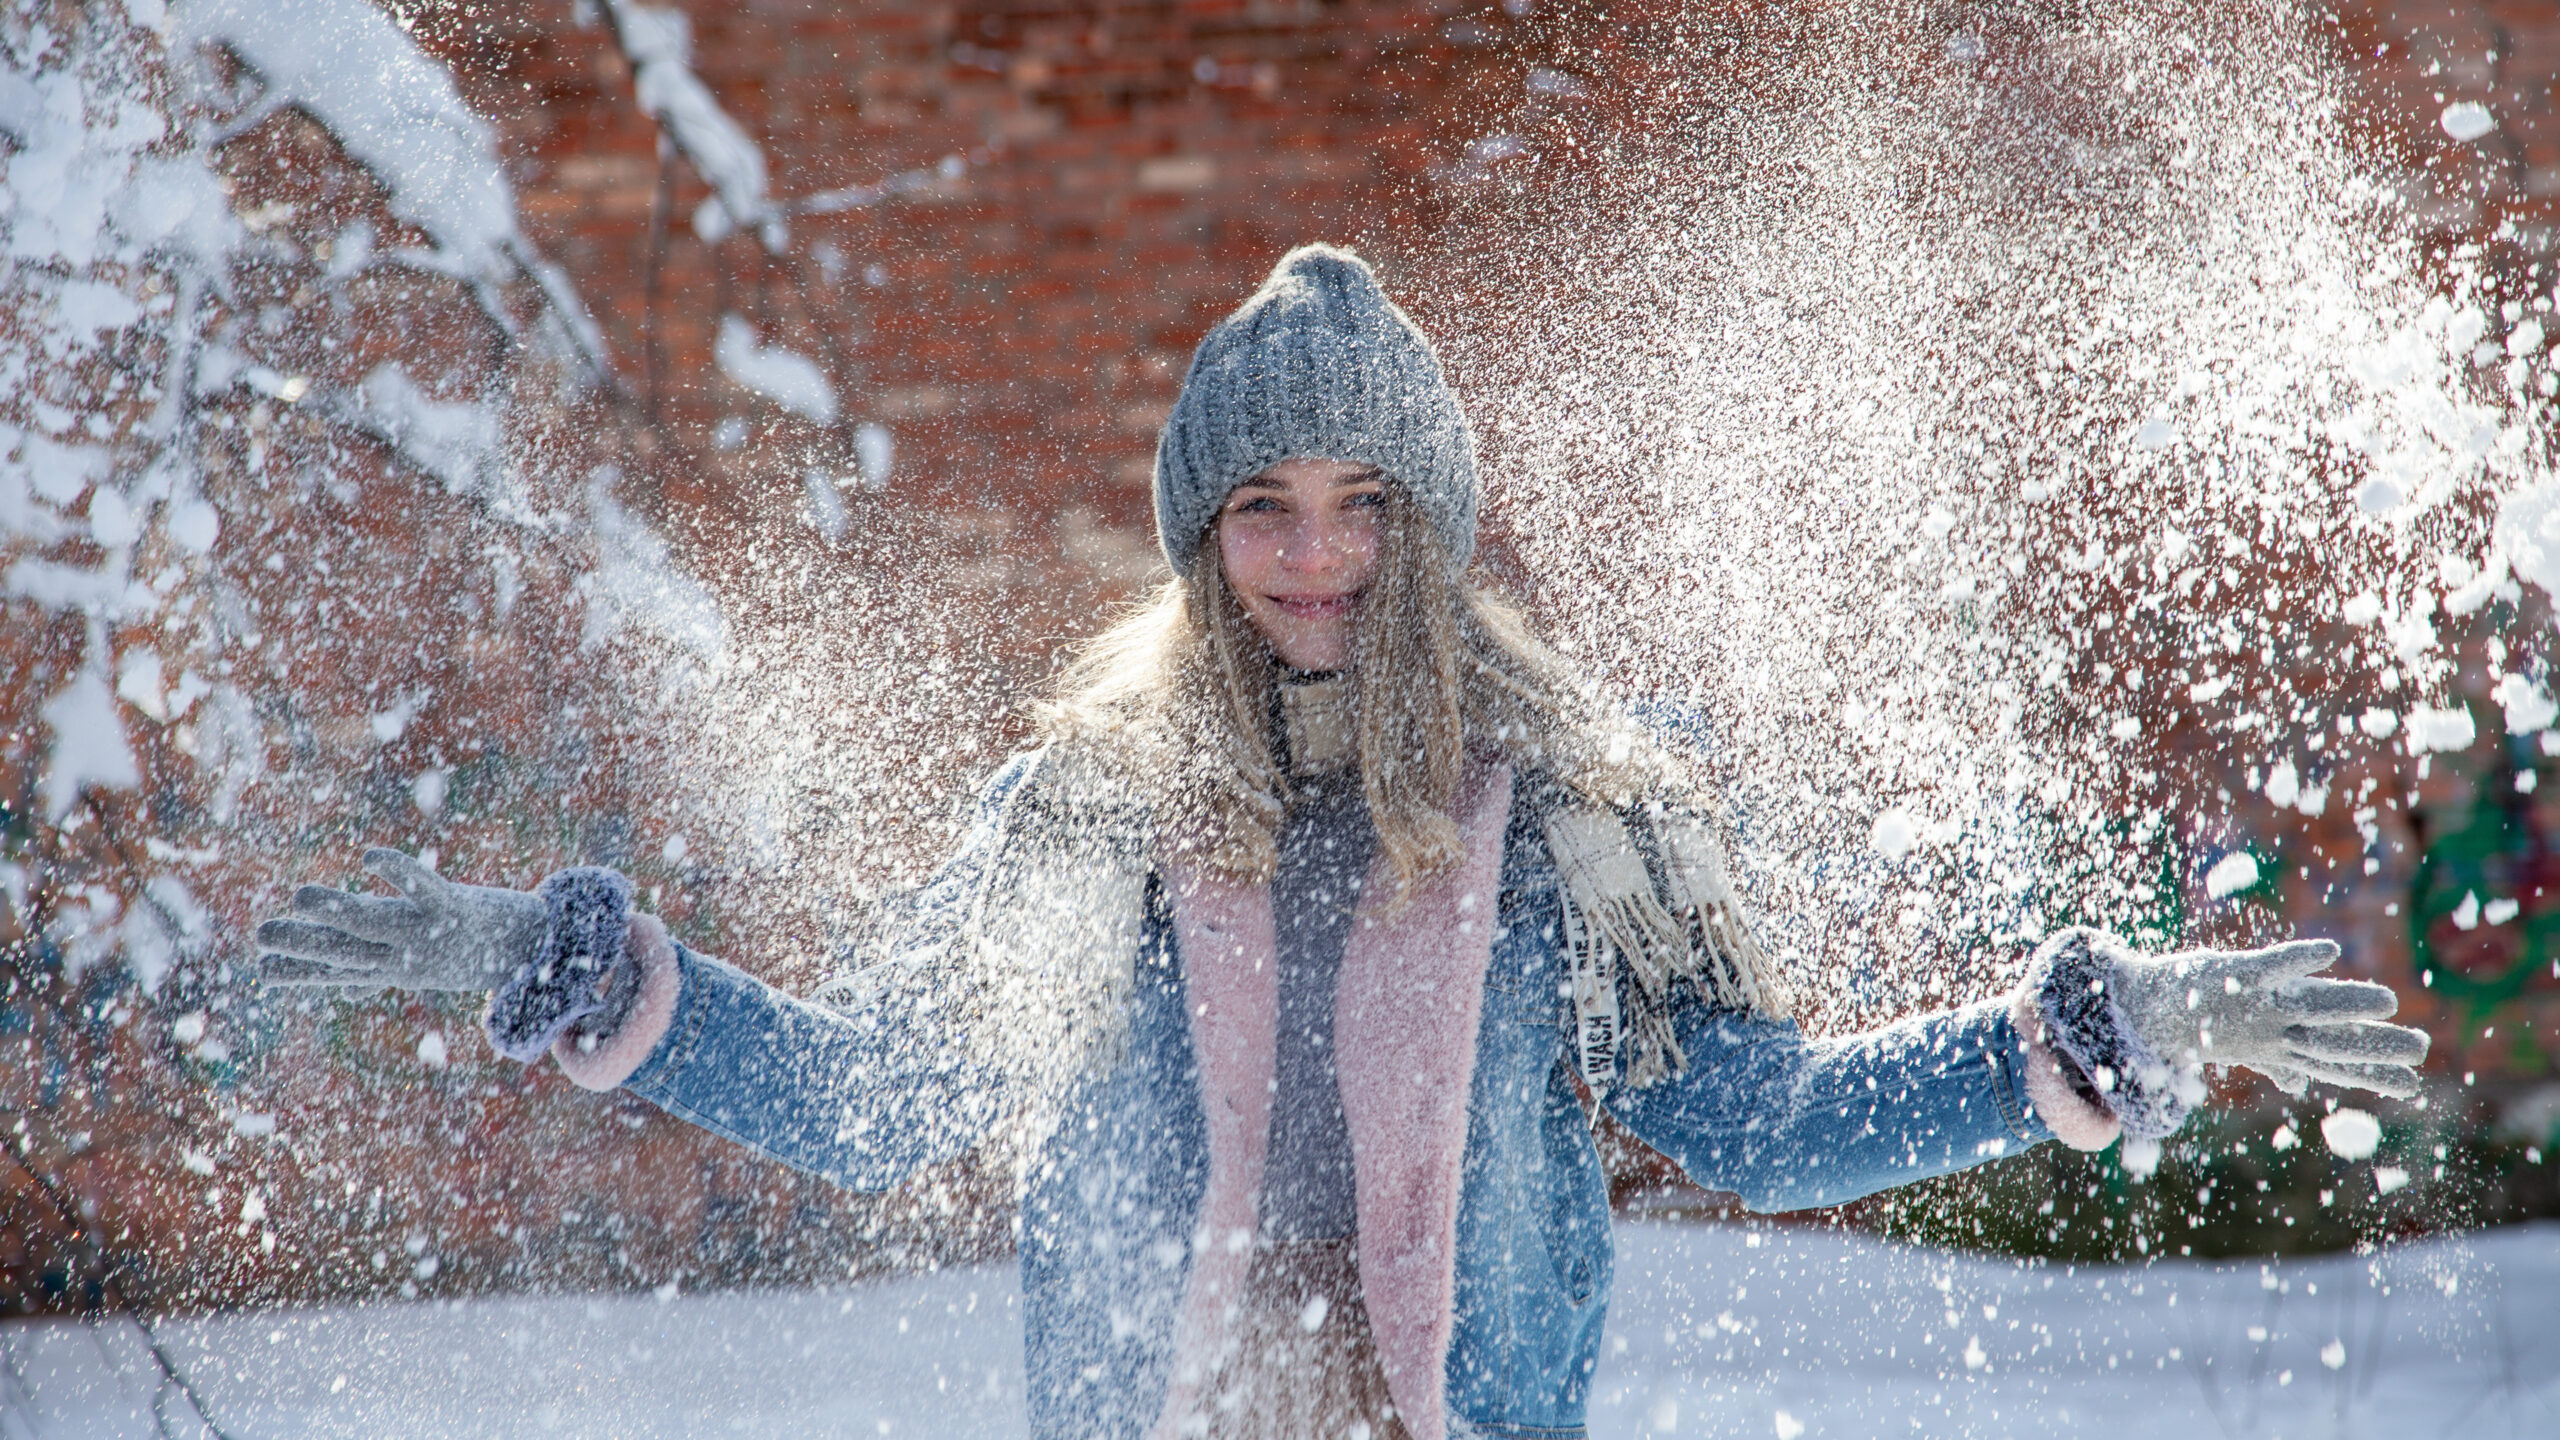 Cute Little Girl Is Playing With Snow In Snow Field Wallpaper Wearing Blue Woolen Knitted Dress And Cap K K 2K Cute